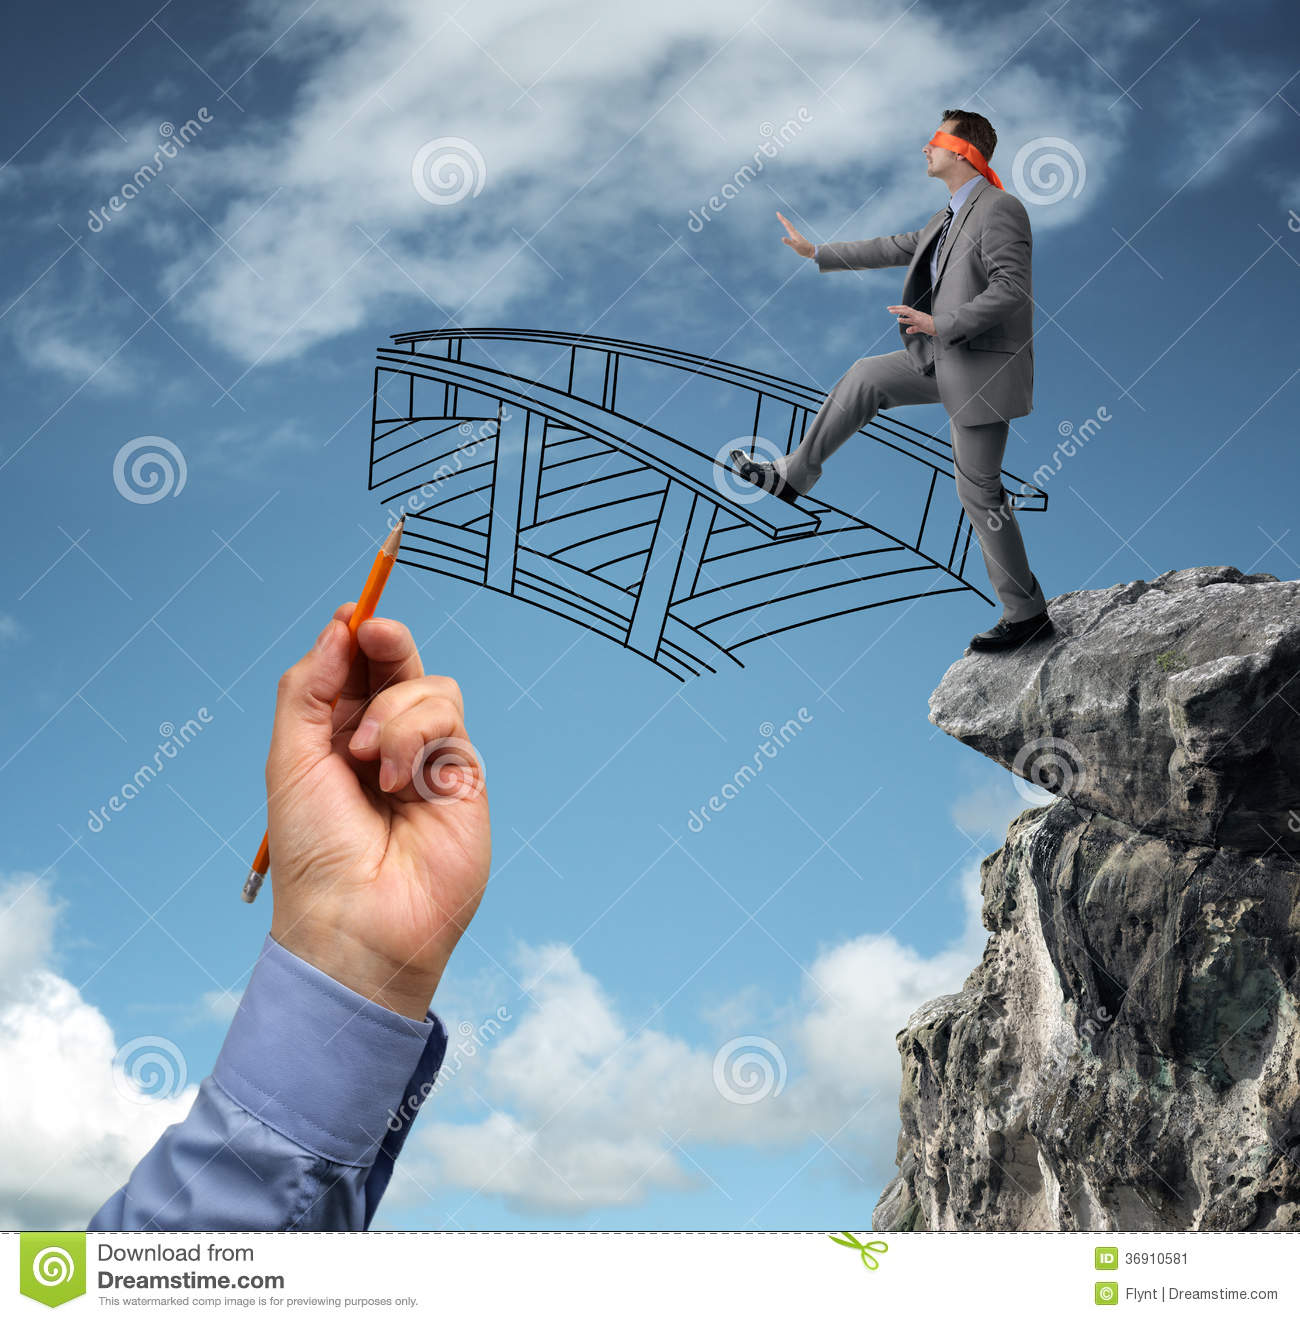 Businessman In A Blindfold Stepping Off A Cliff Ledge With Giant Hand